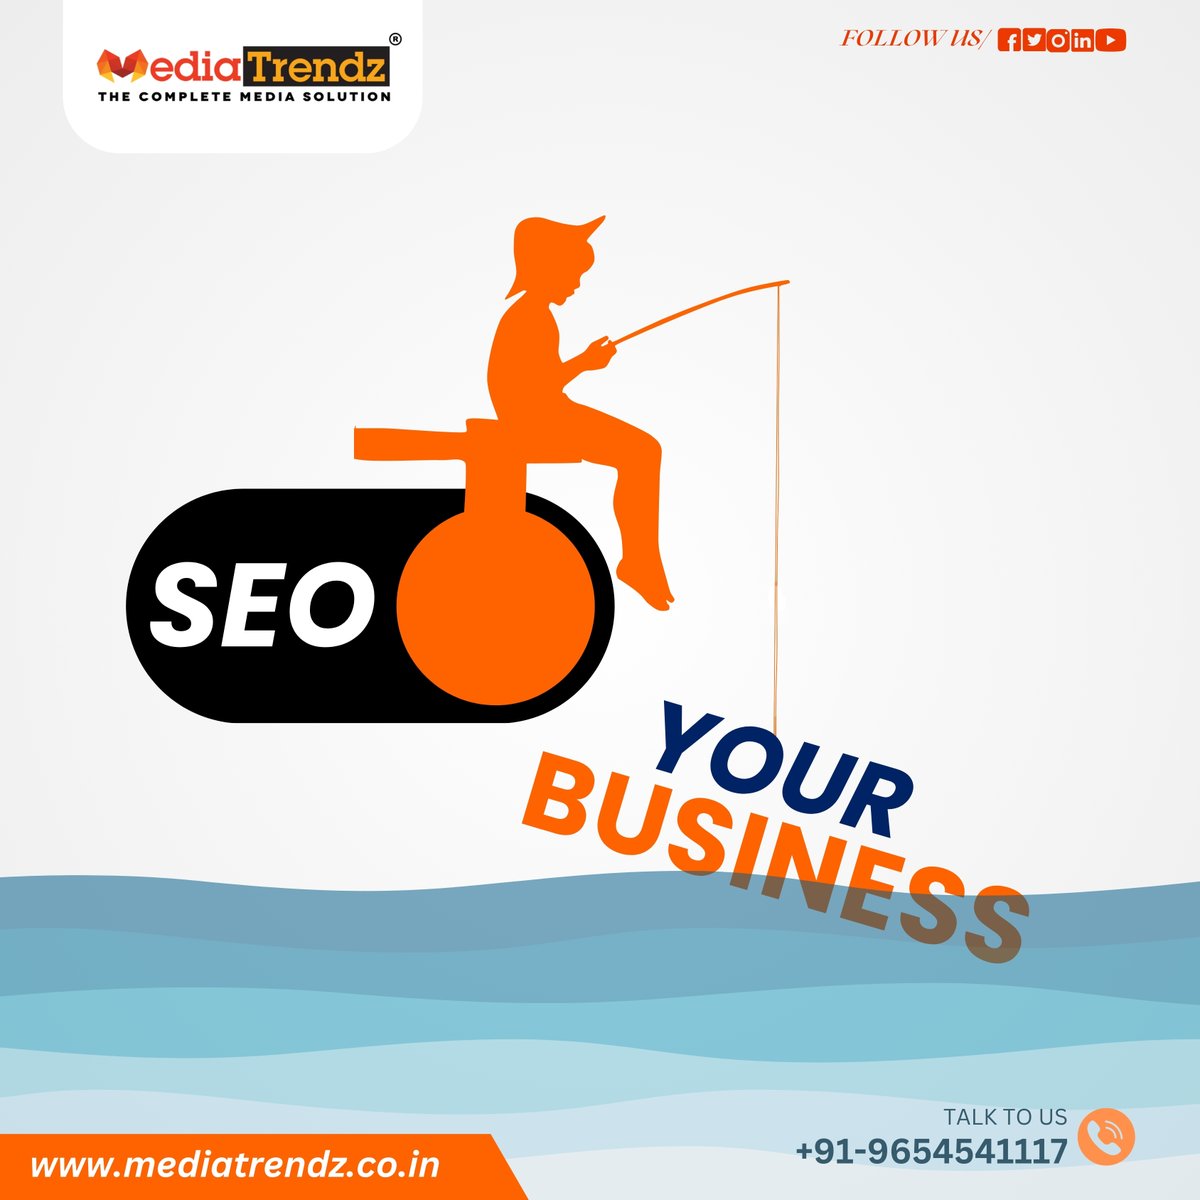 Reeling in Success with Media Trendz🎣 
.
Dive into the digital ocean and watch your business thrive with our expert SEO services
.
#MediaTrendz #DigitalMarketing #SEO #OnlineVisibility #BusinessGrowth #MarketingStrategy #SearchEngineOptimization #DigitalAgency #InternetMarketing